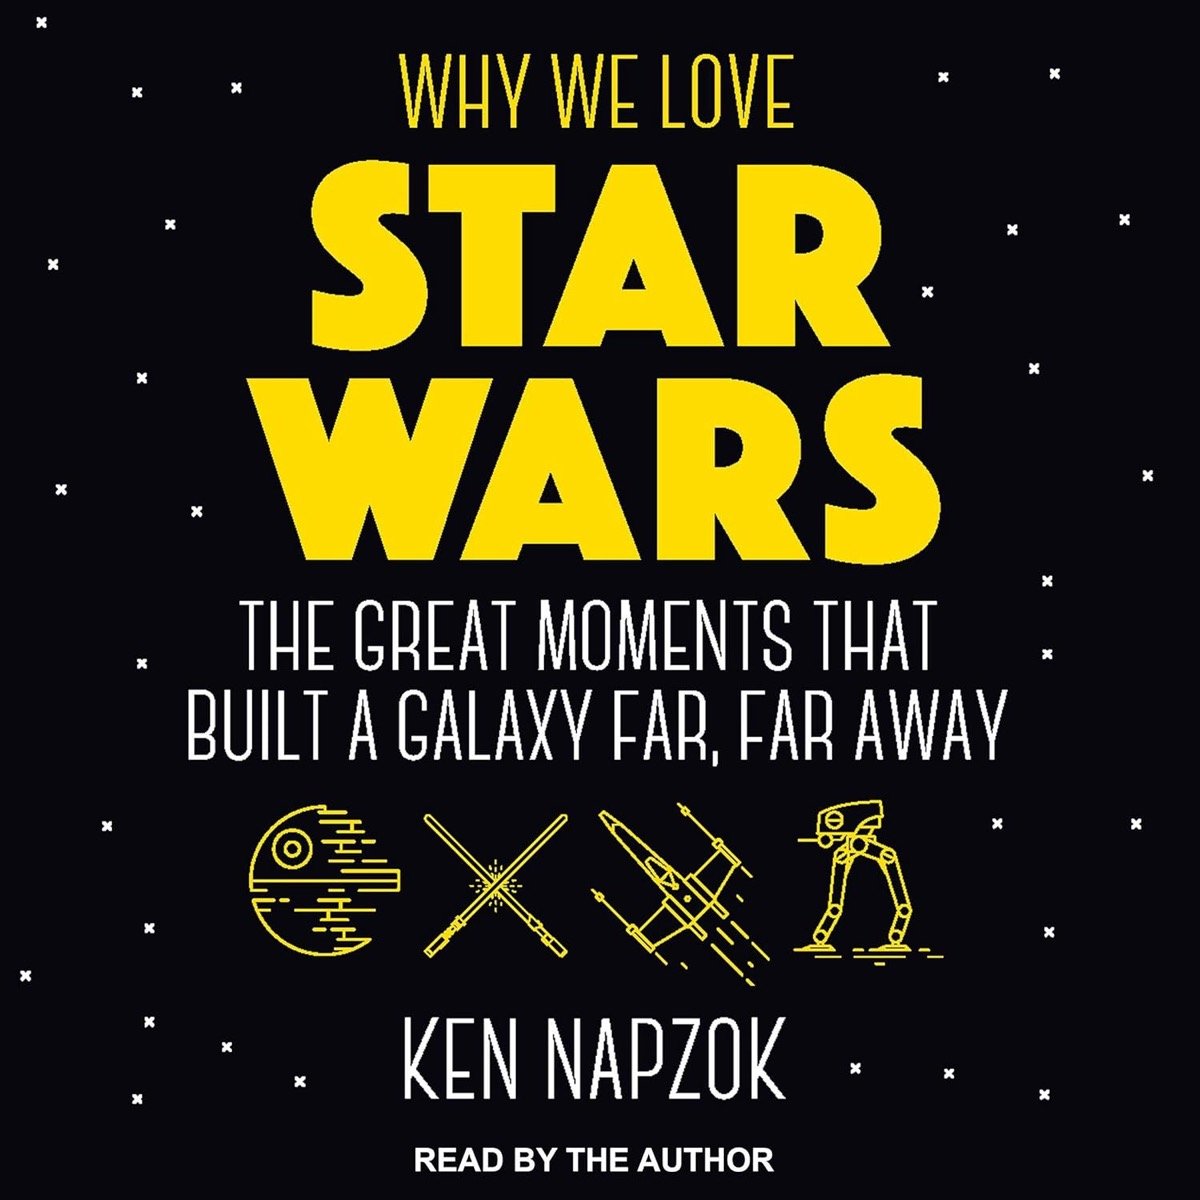 Cover art for "Why We Love Star Wars- The Great Moments That Built a Galaxy Far, Far Away" showing the title 